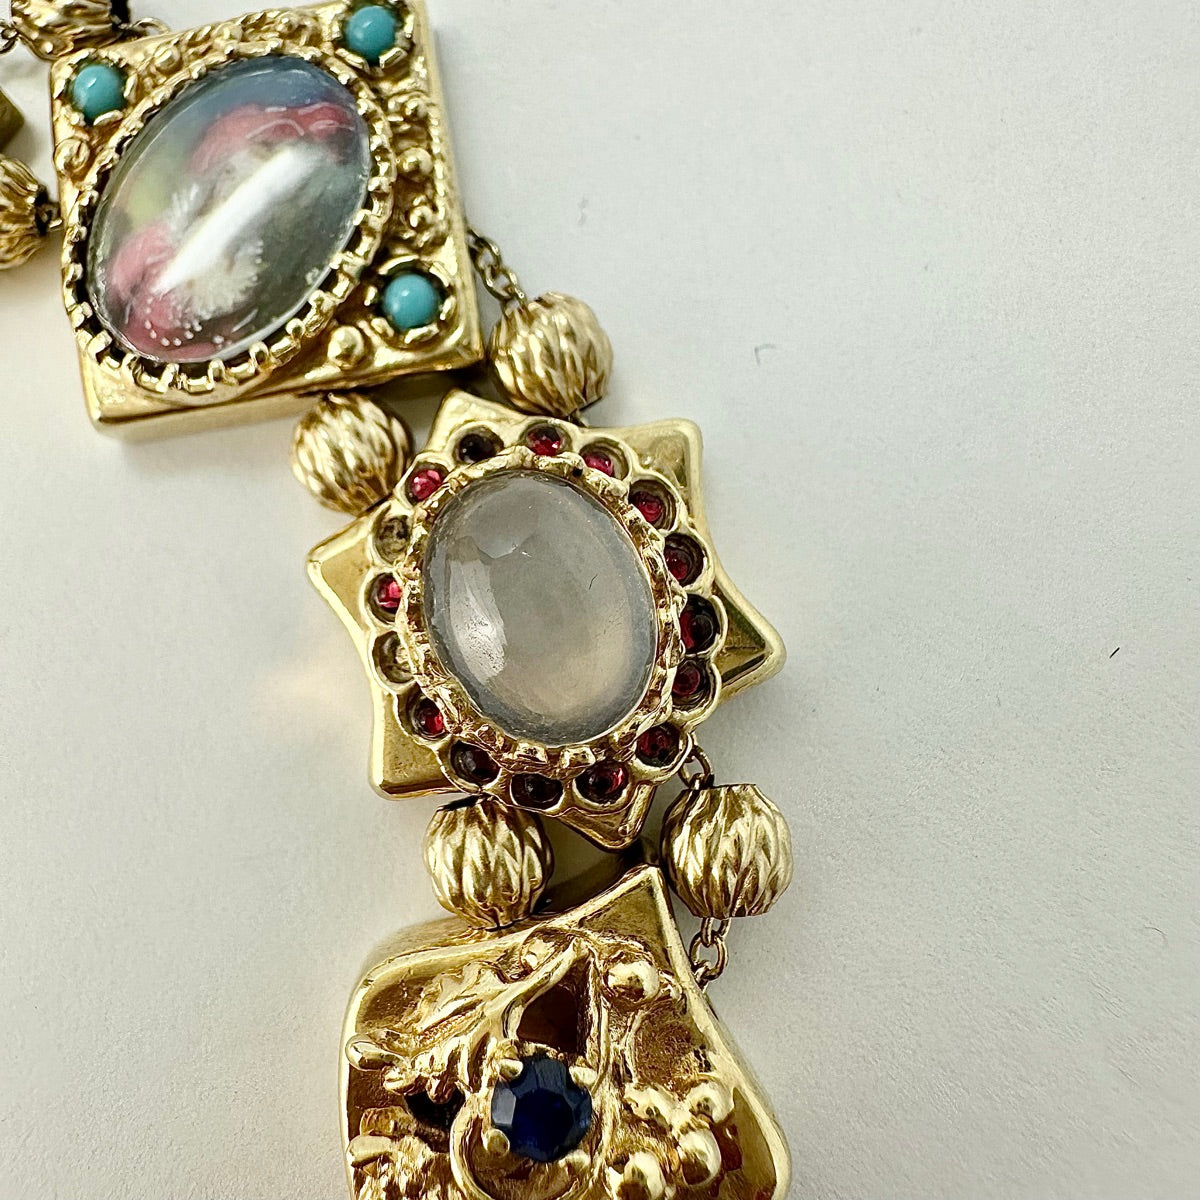 Vintage 14K Gold Slide Bracelet with Semiprecious Stones and Pearls